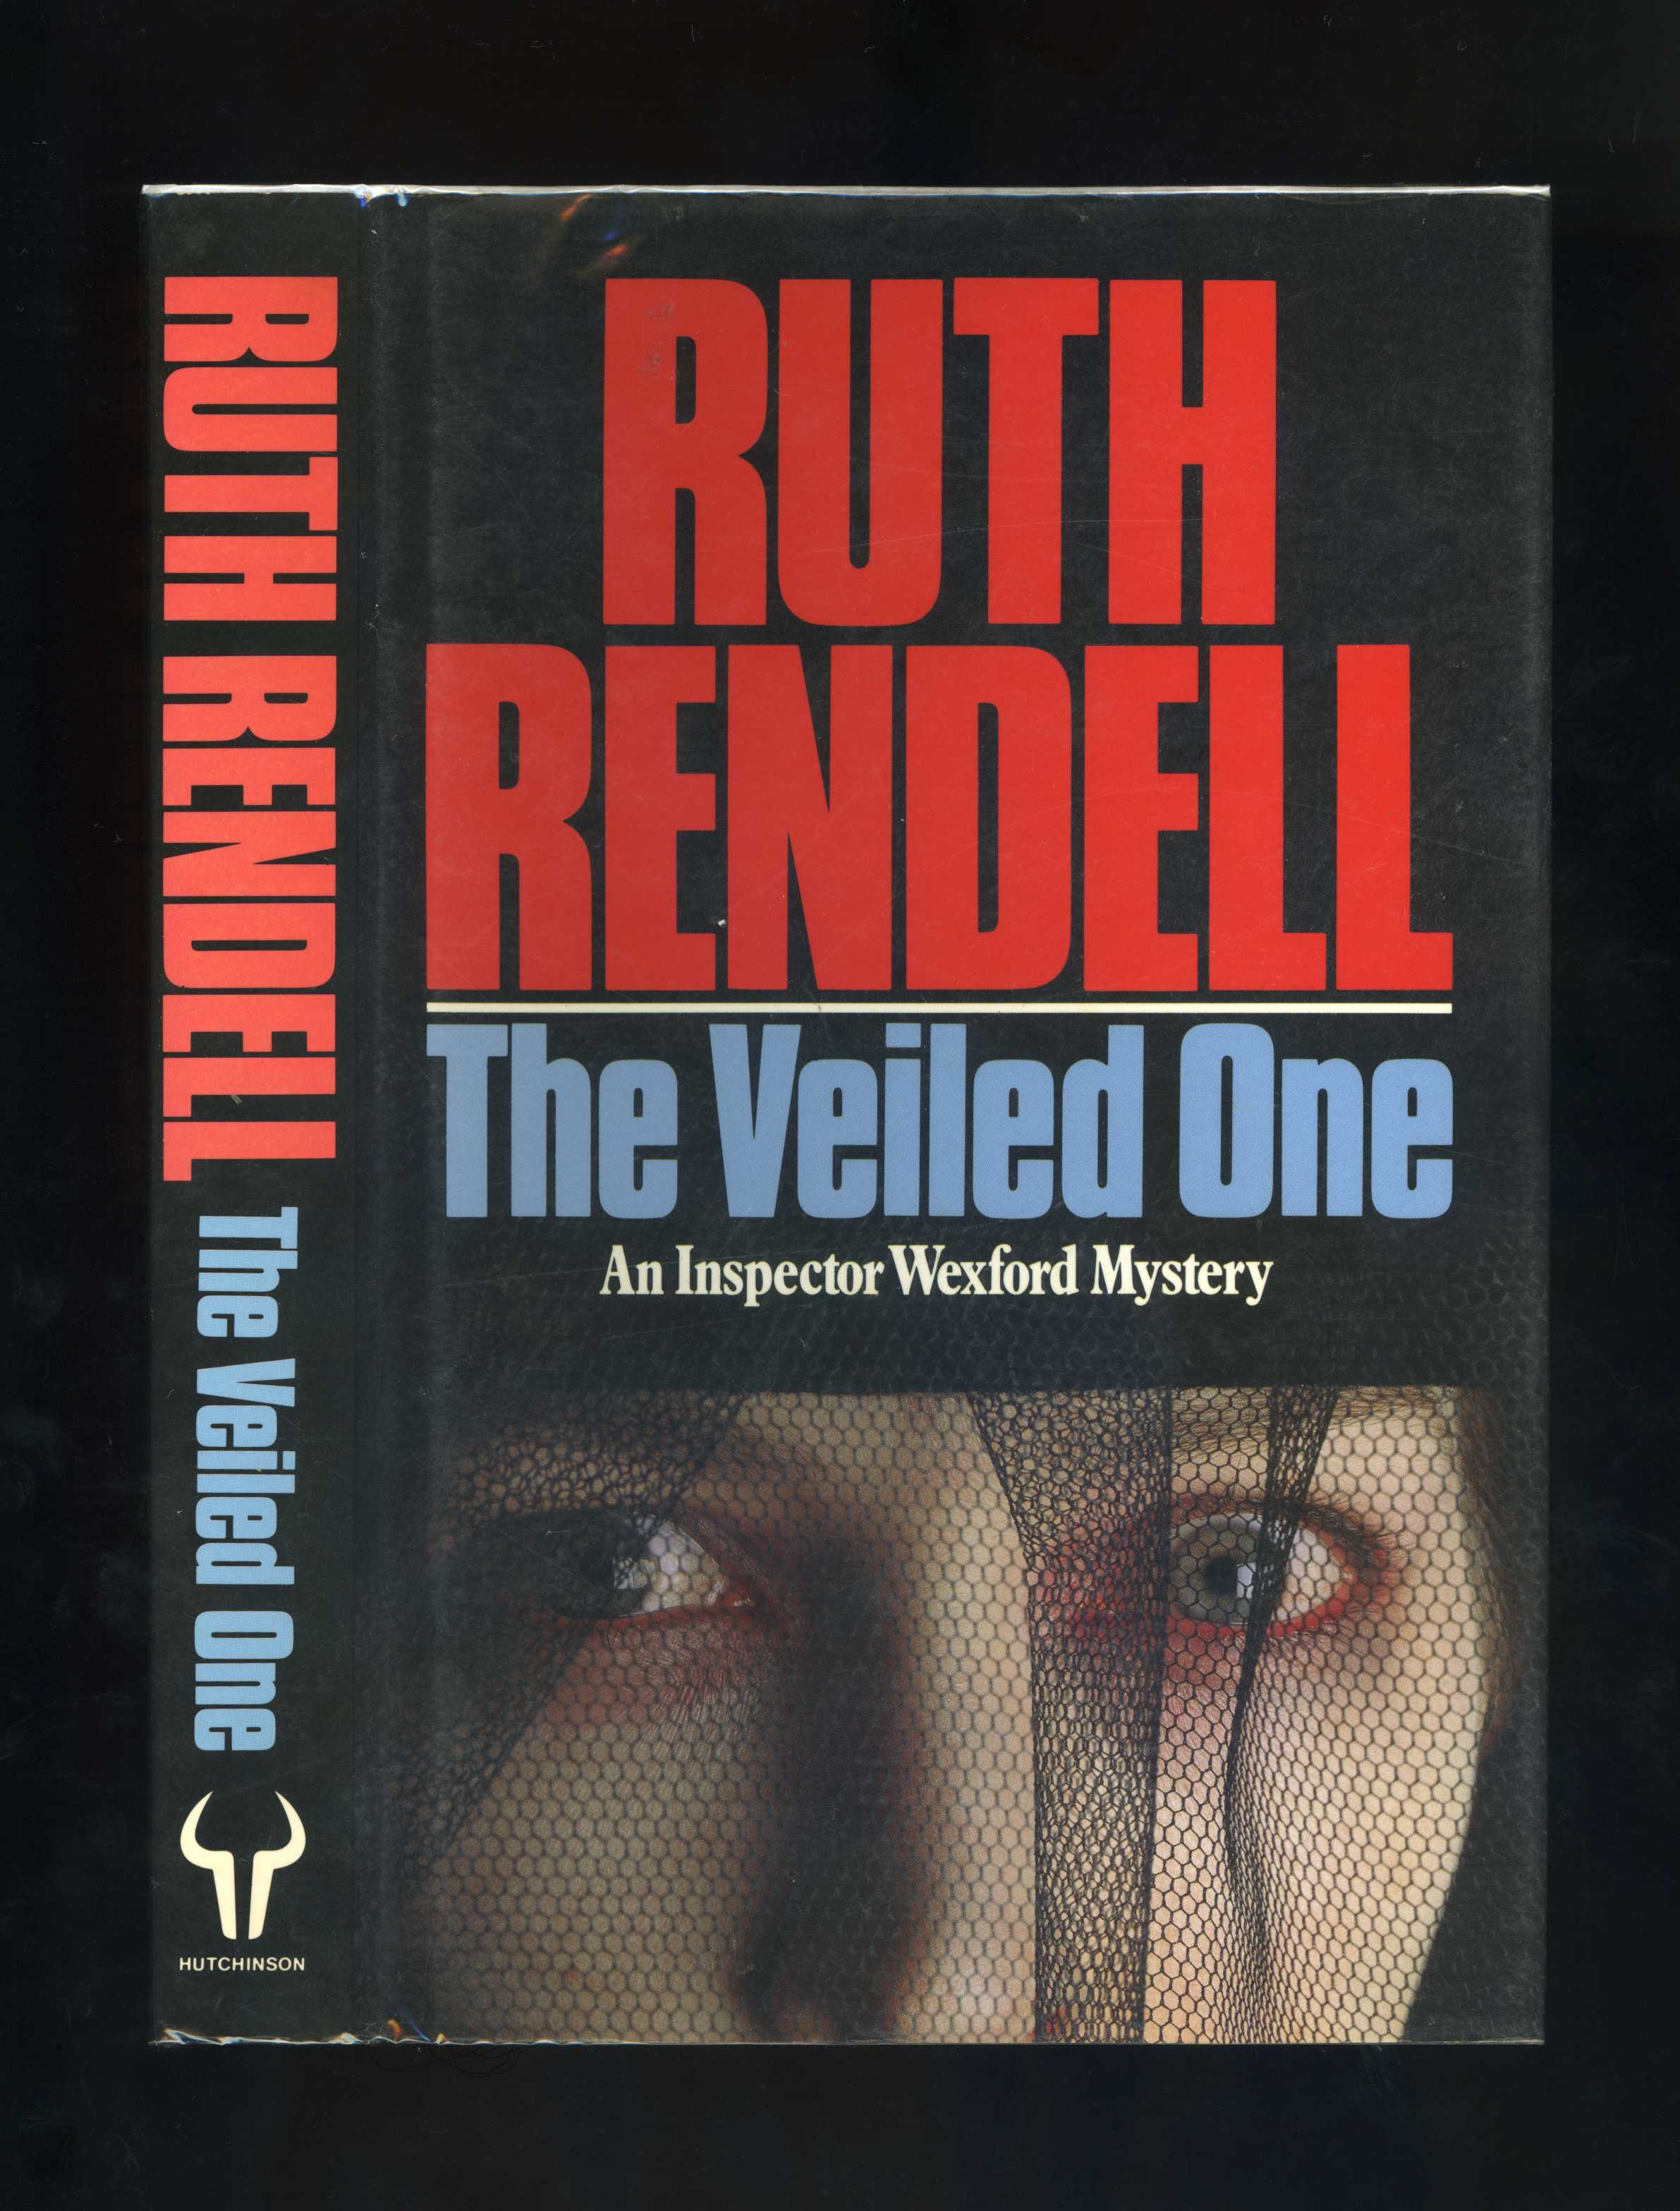 THE VEILED ONE: An Inspector Wexford Mystery (1/2) - Ruth Rendell